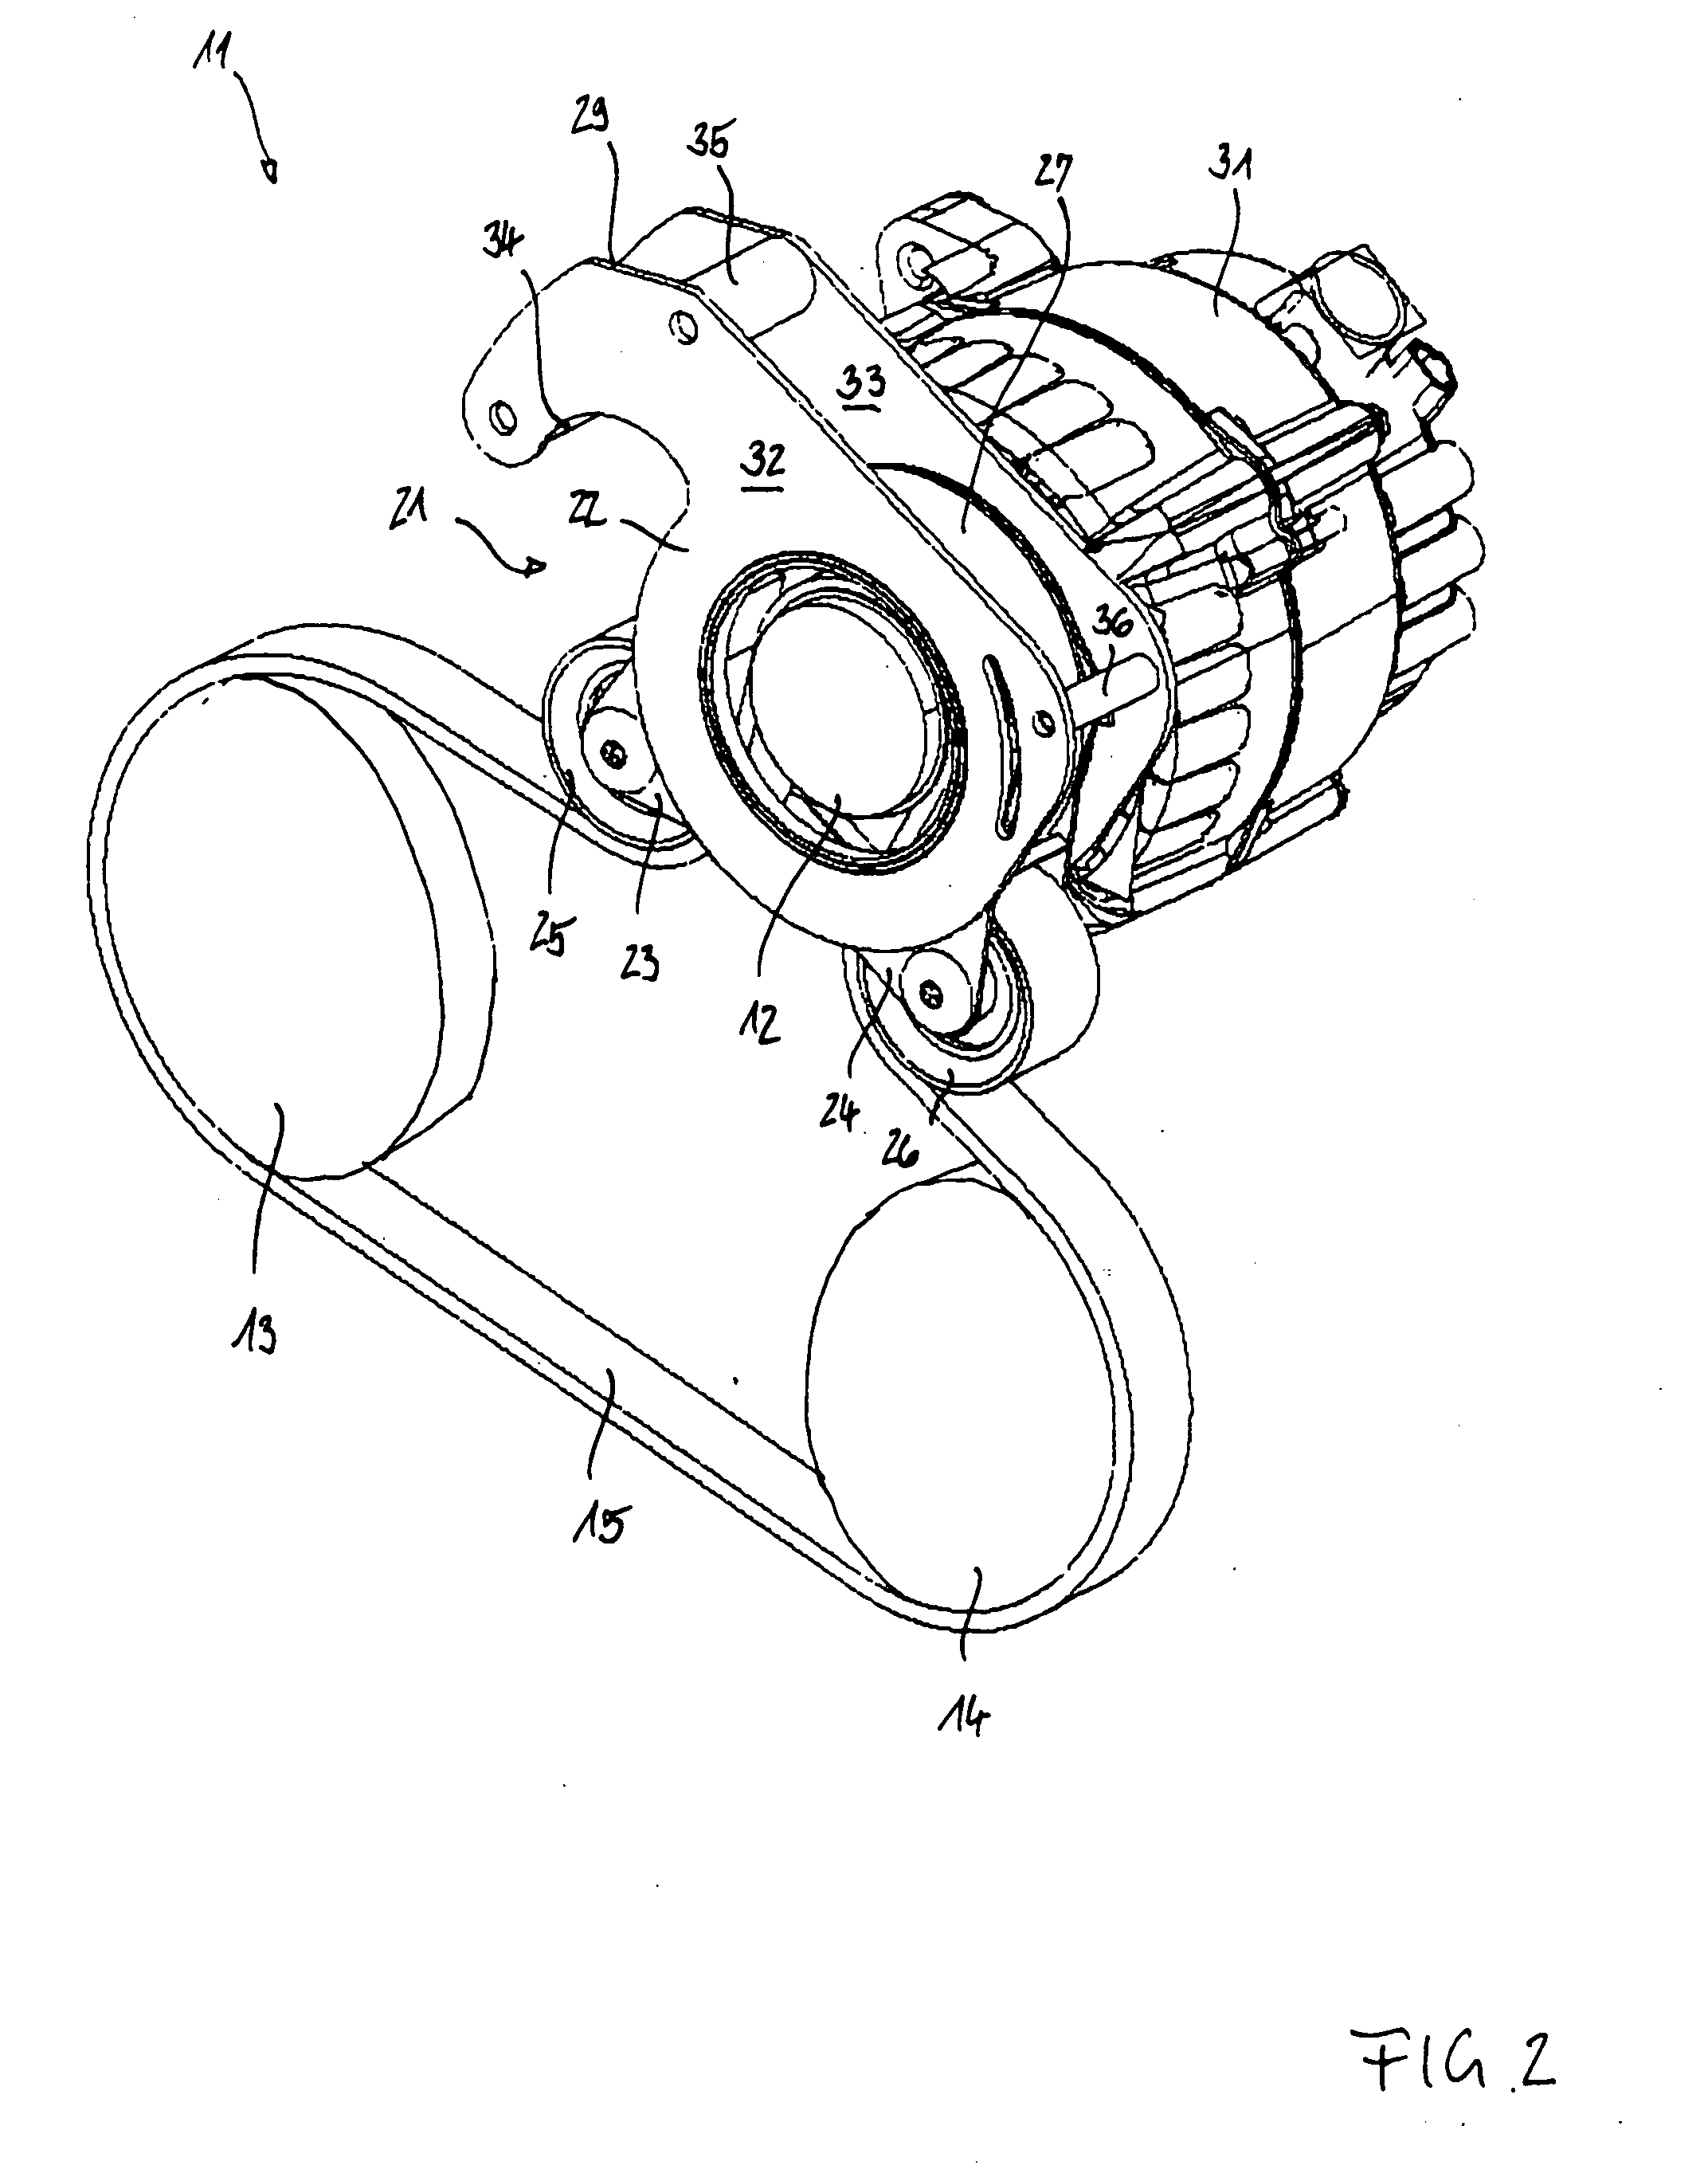 Belt tensioning device for being used with a starter generator